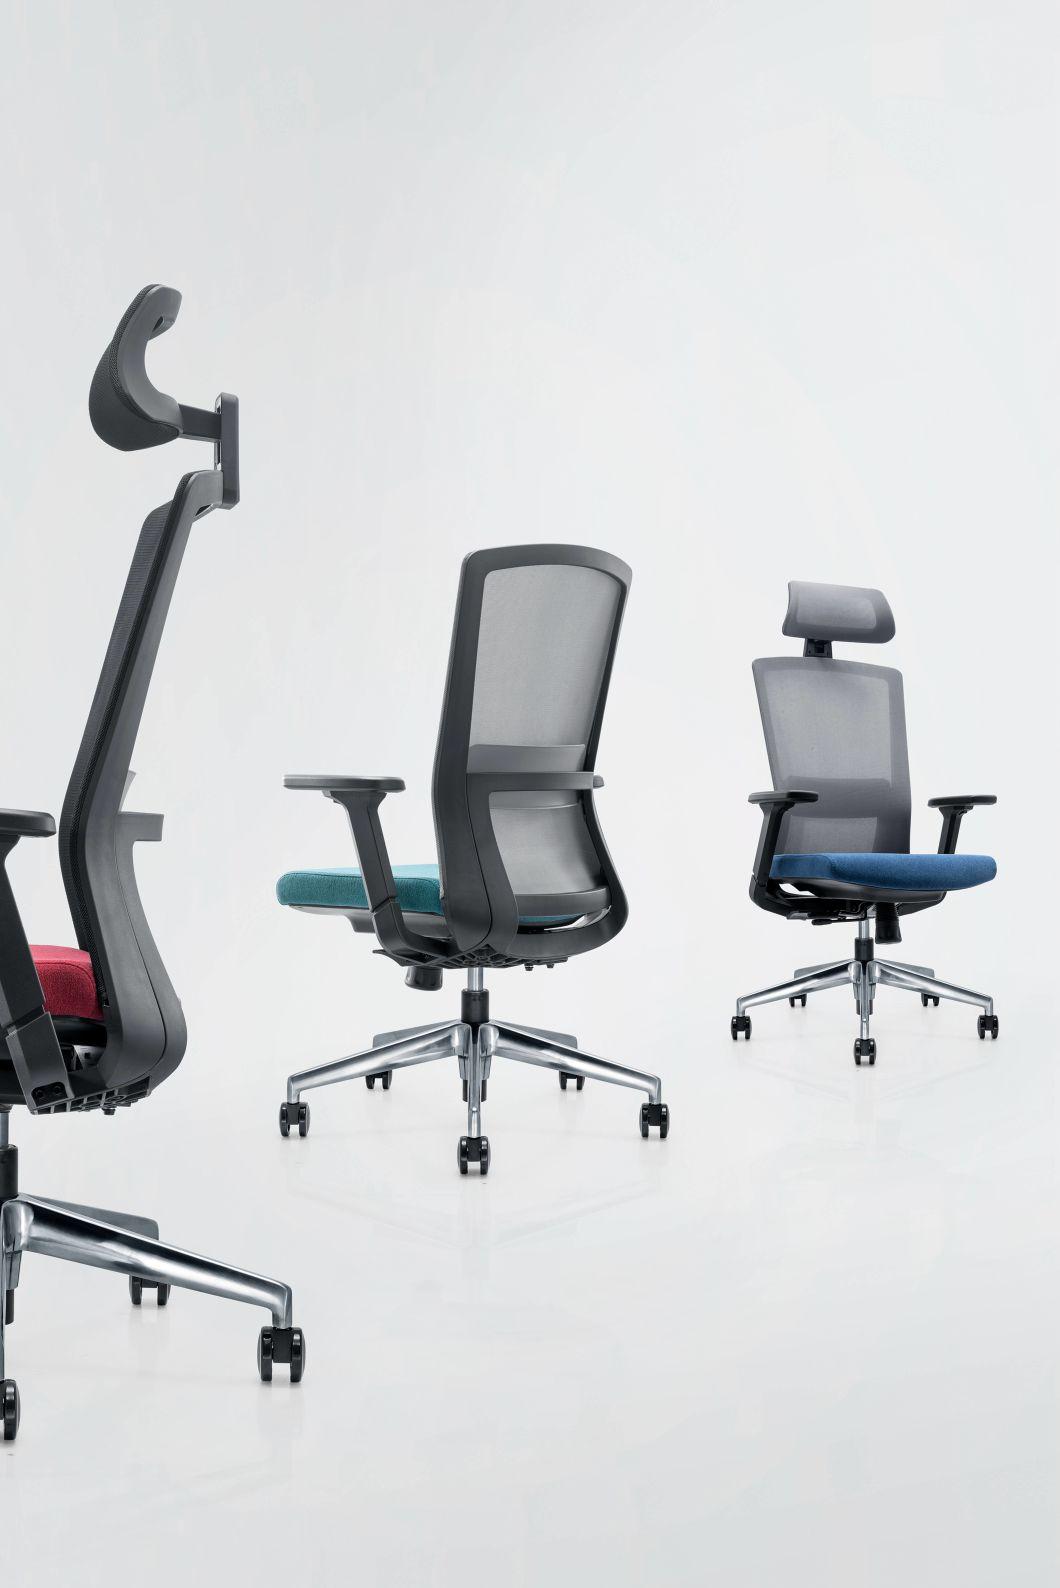 with Armrest Foshan Game Wholesale Market Plastic Chairs Office Chair Low Price